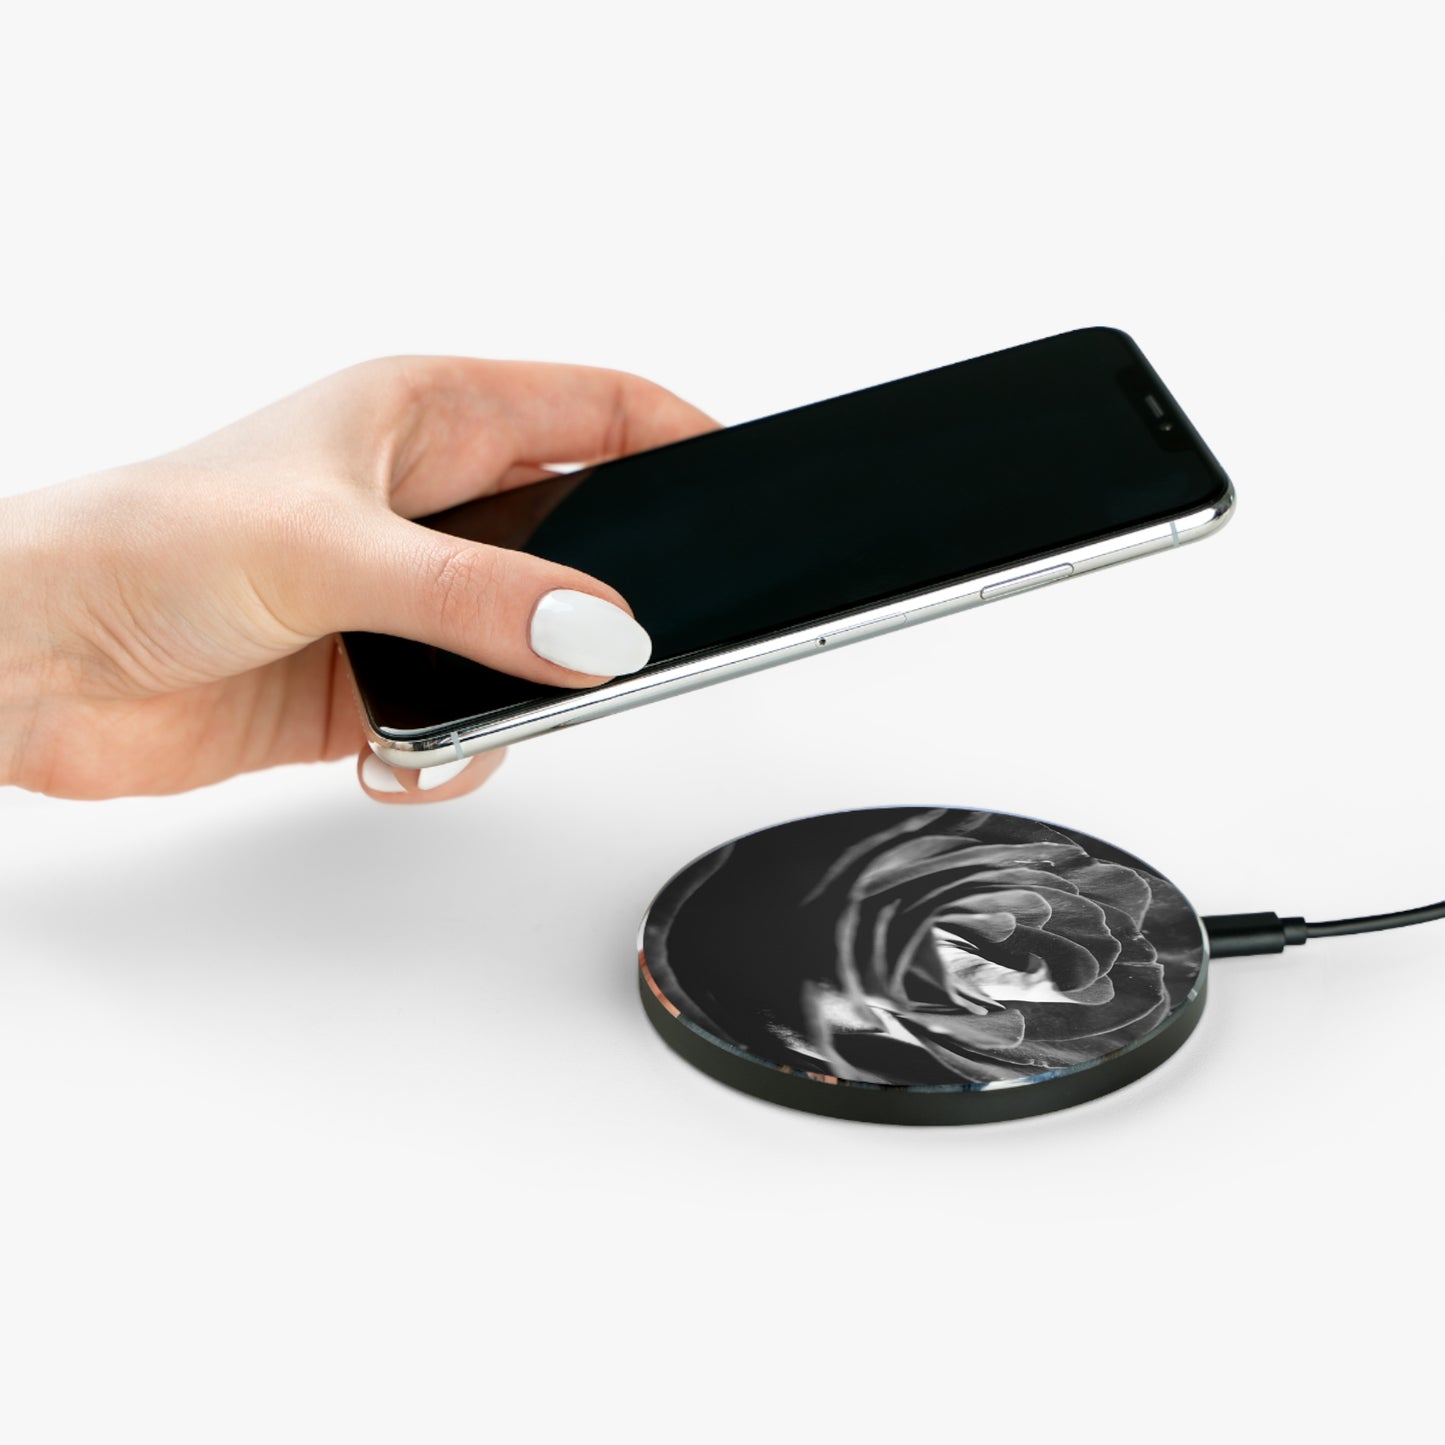 Dark Black and White Rose Wireless Charger